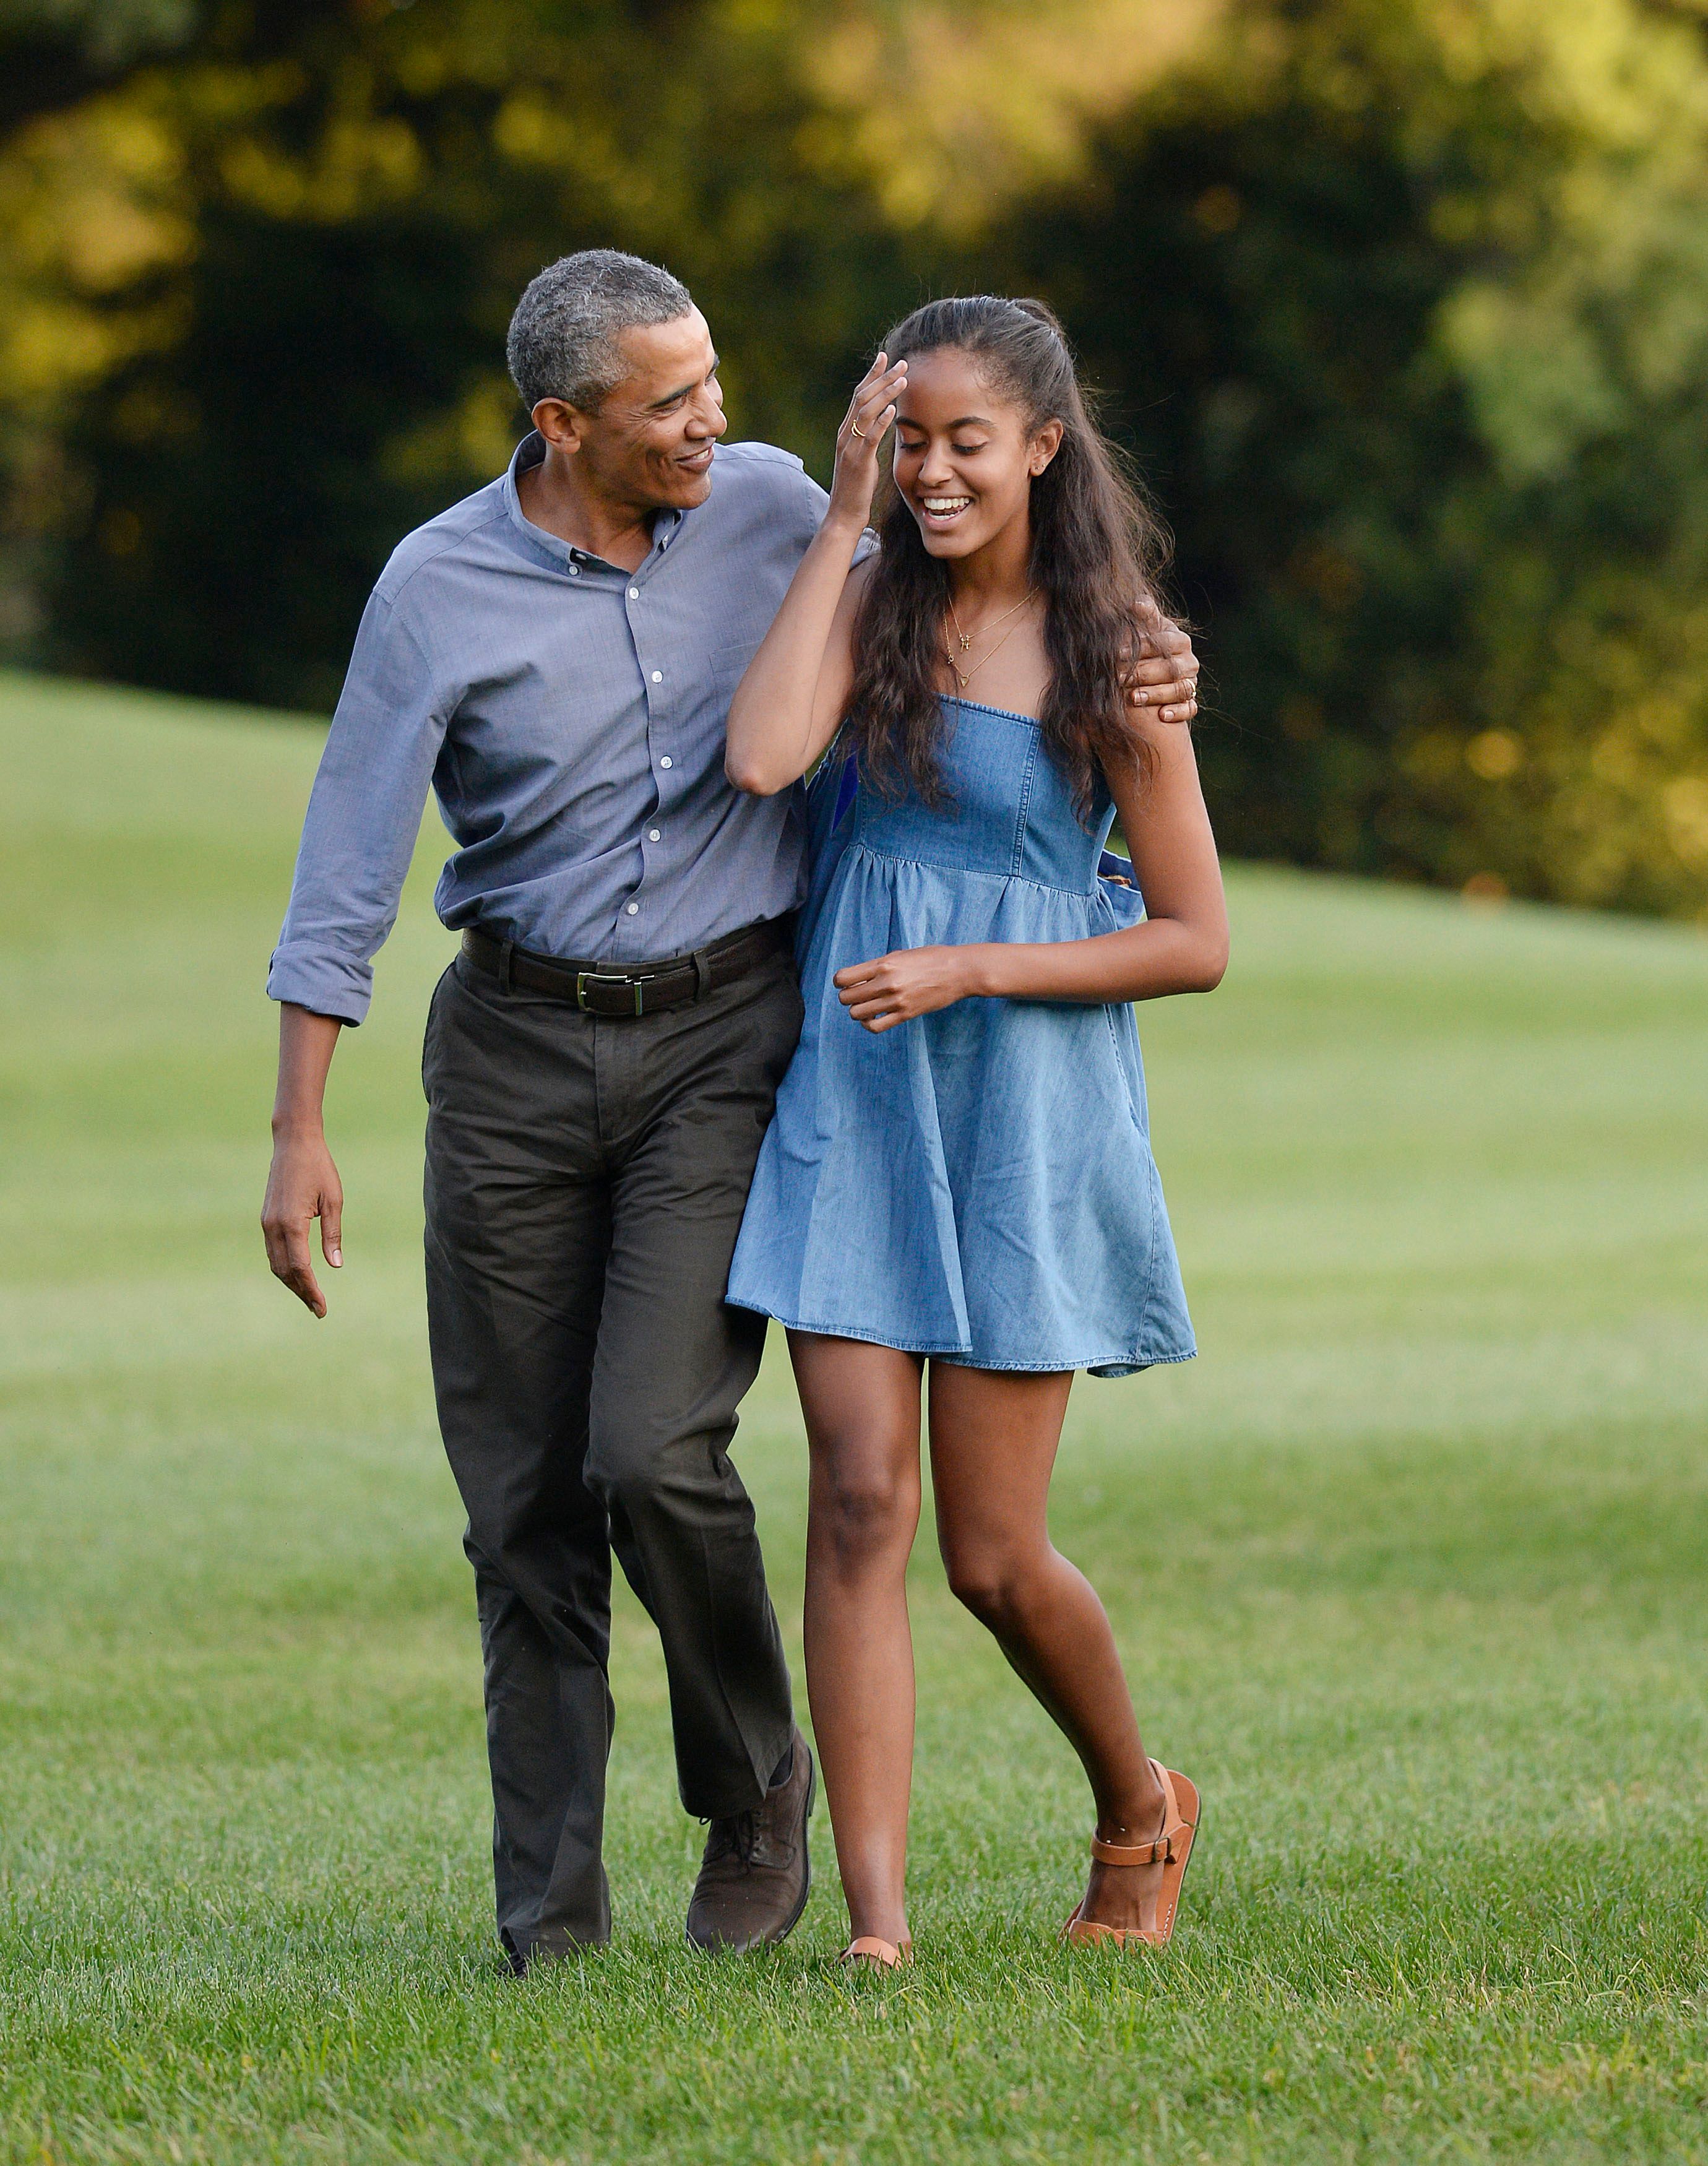  Barack Obama and Sasha Obama at the White House in August 23, 2015 in Washington, D.C. The first family was returning from vacationing on Martha's Vineyard. | Source: Getty Images